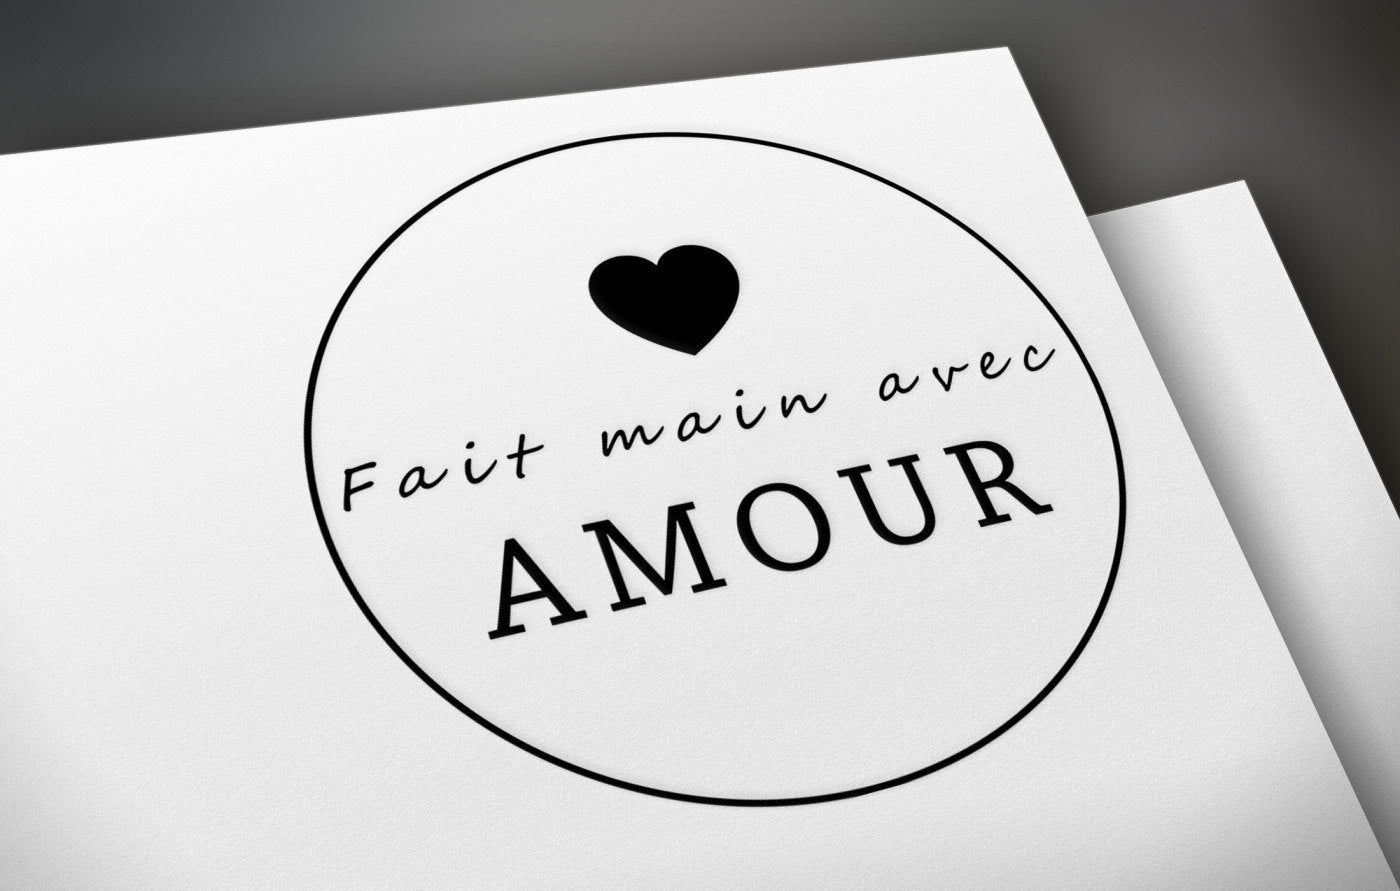 Fait main avec amour printable tags - One and half inch round - Digital collage sheet